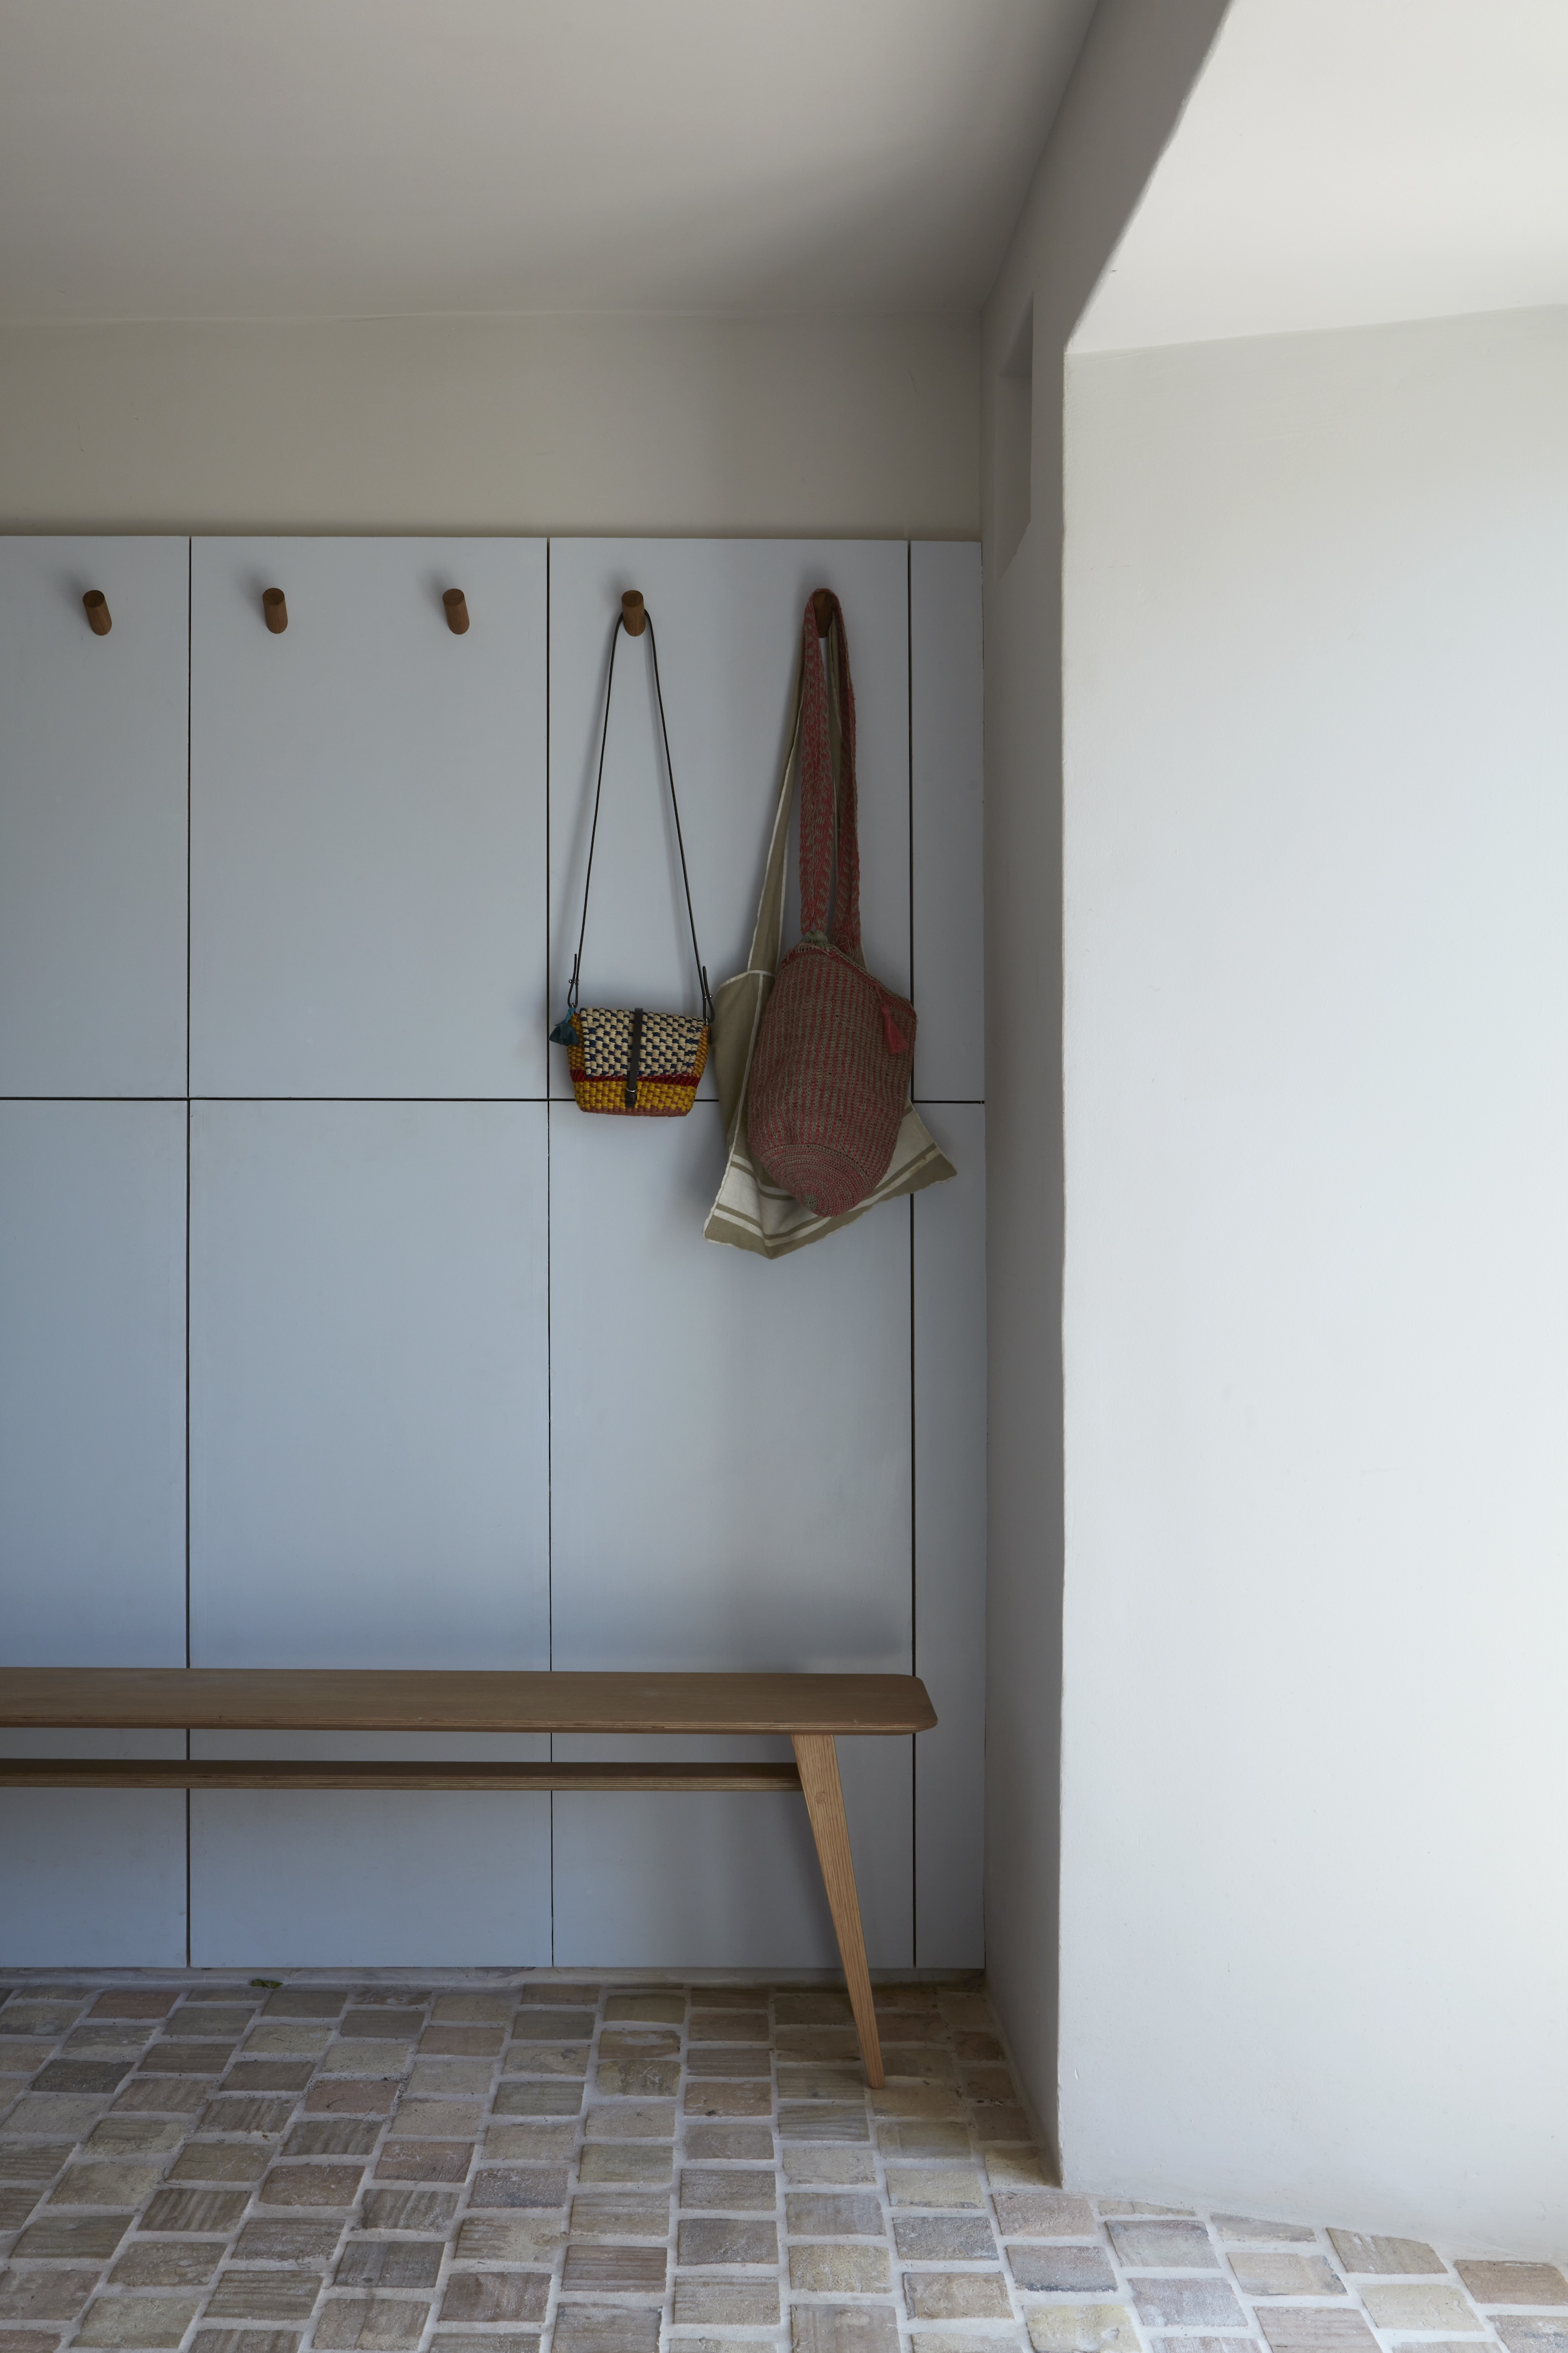 tuckey design studio fitted the entrance hall/boot room with painted wood cabin 19